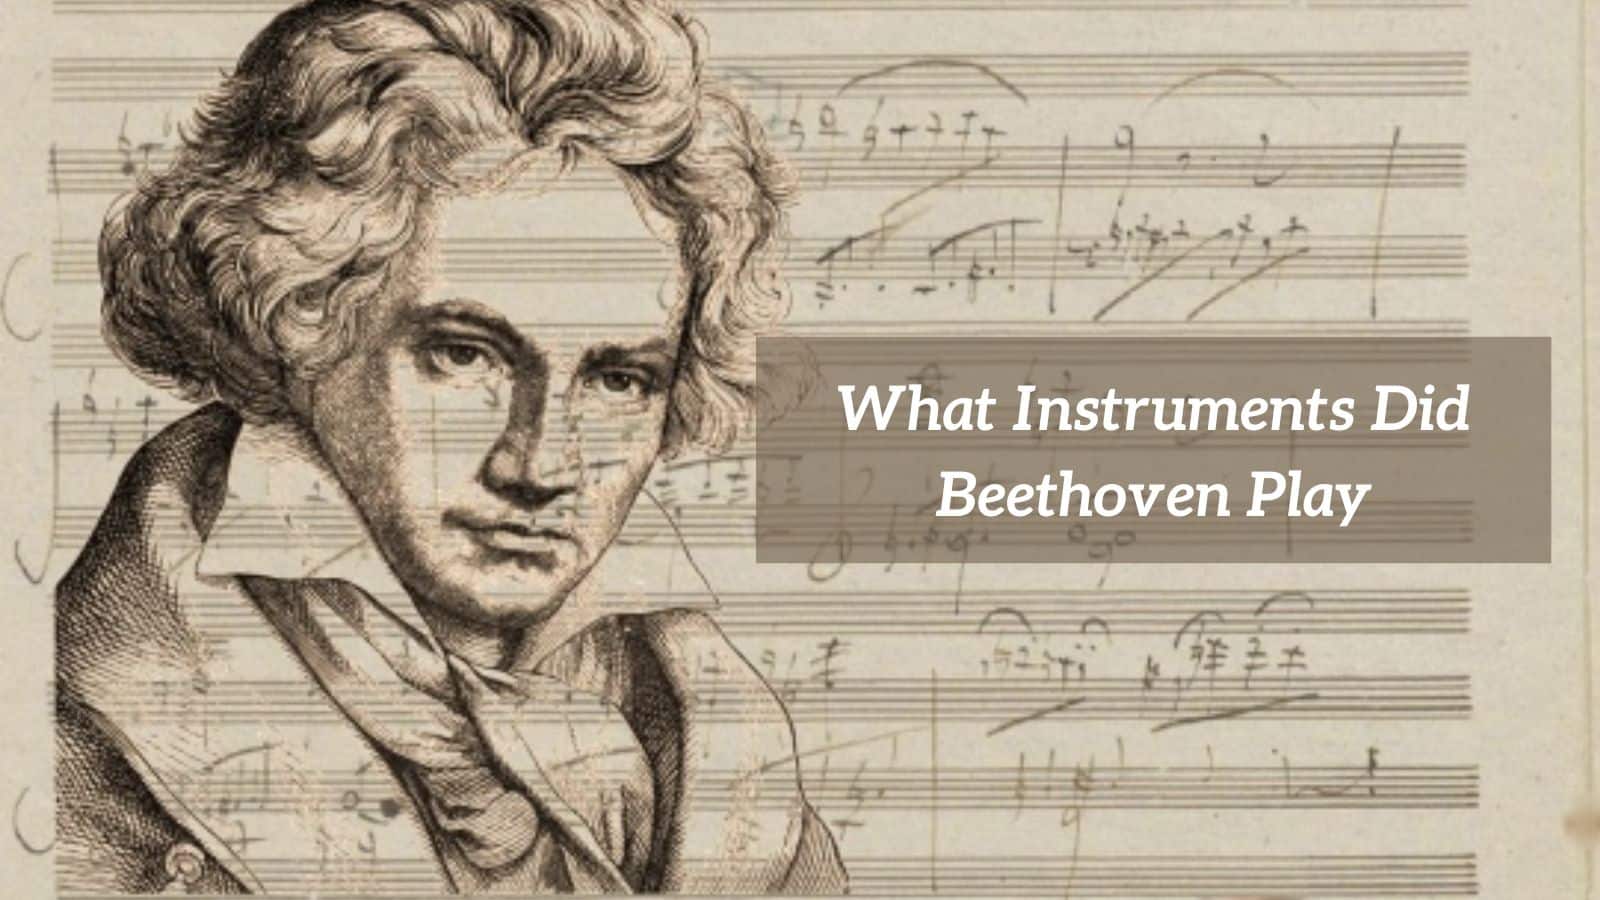 What Instruments Did Beethoven Play